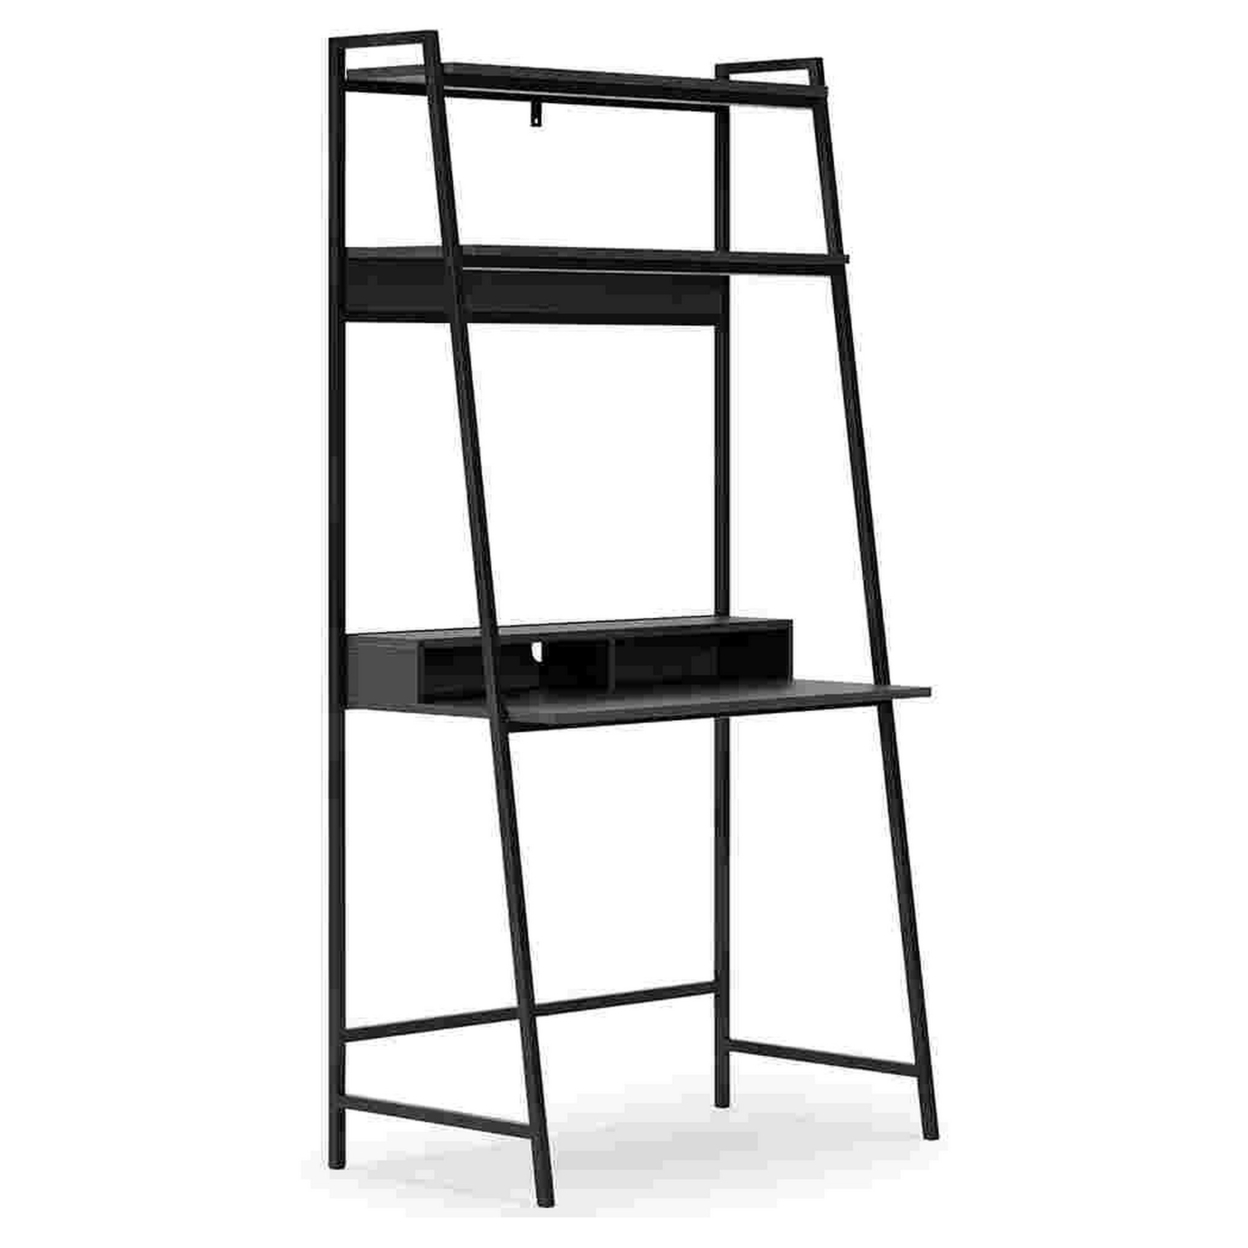 Office Desk With 2 Upper Shelves And Metal Legs, Black And Gray- Saltoro Sherpi